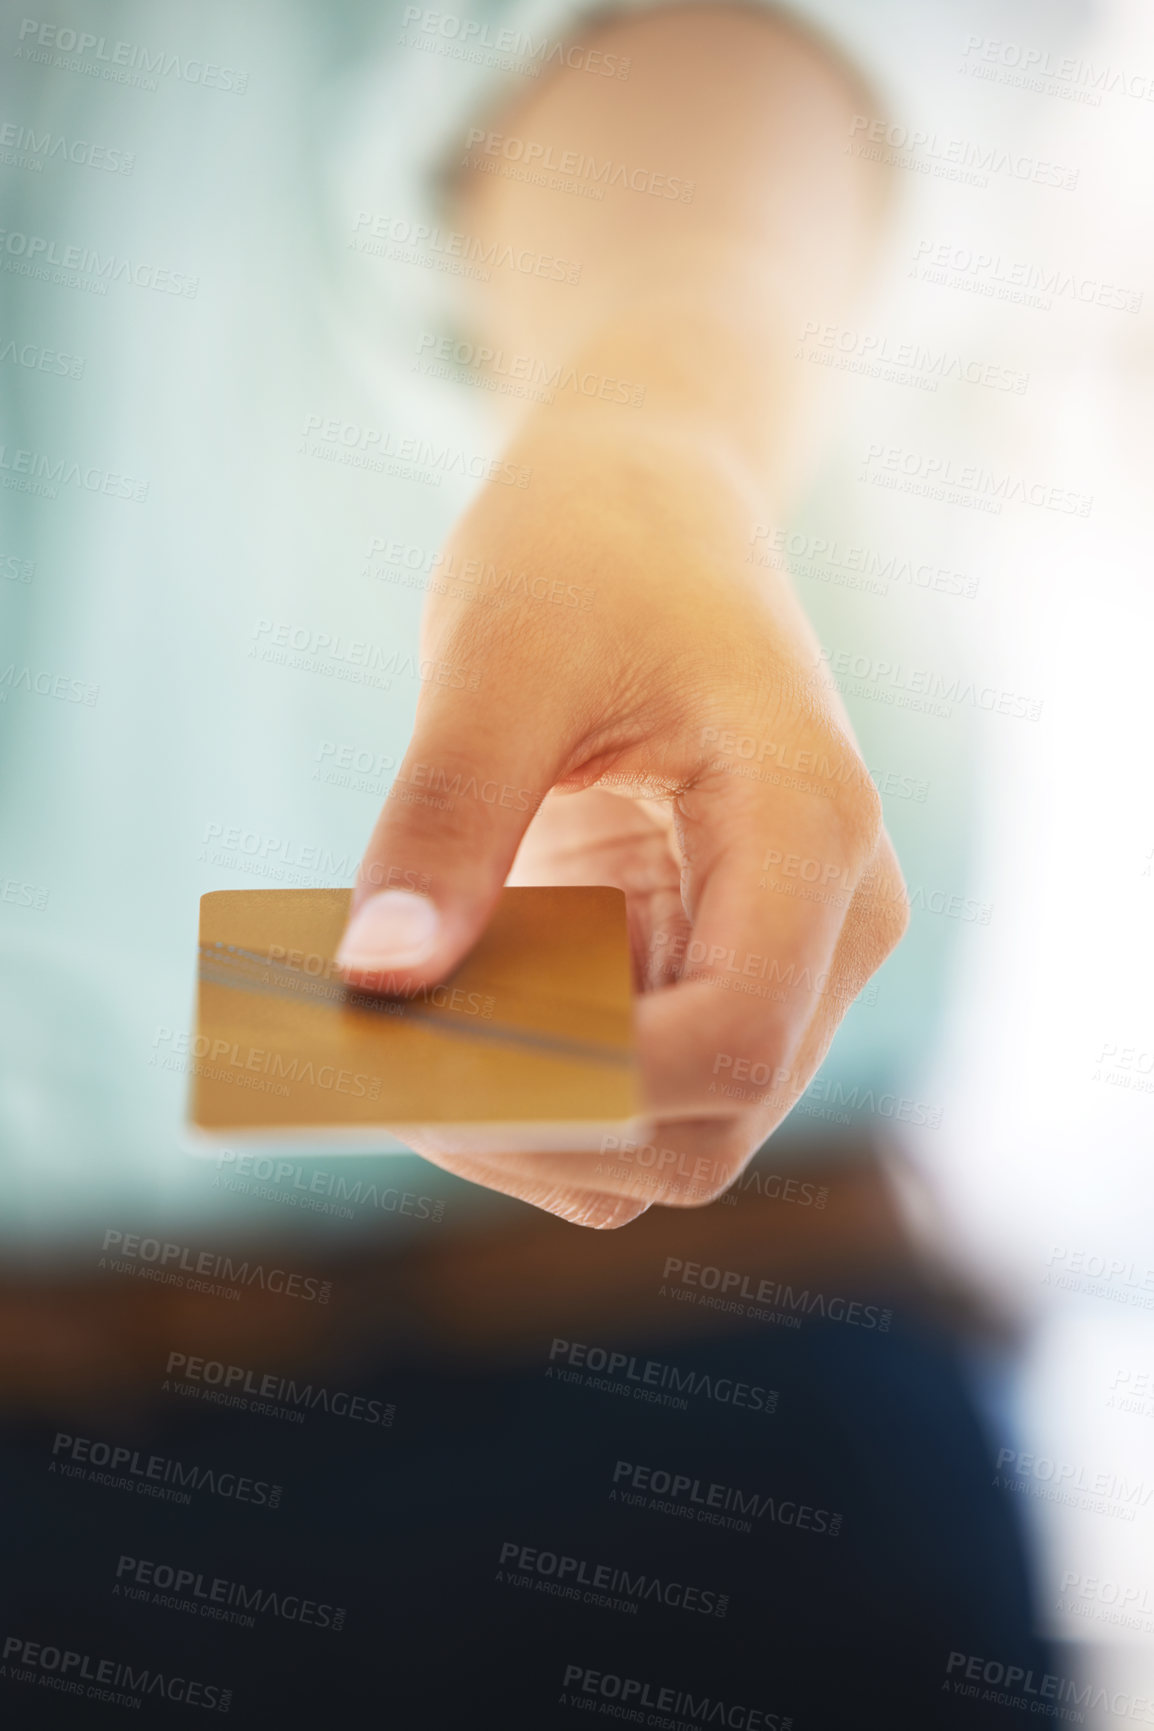 Buy stock photo Shot of an unrecognizable person holding a credit card